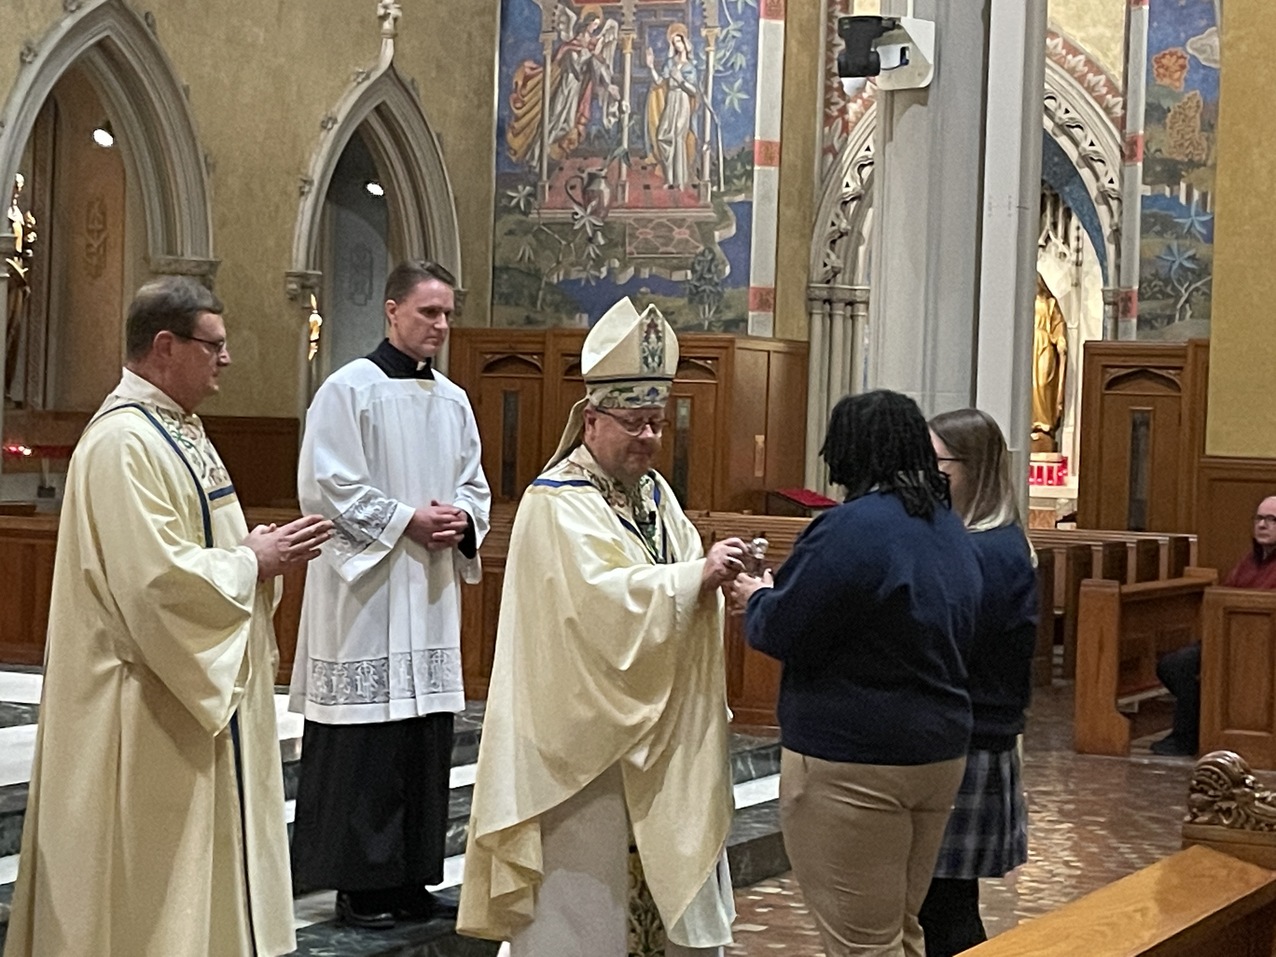 Students gather in cathedral for annual diocesan Mass for Life